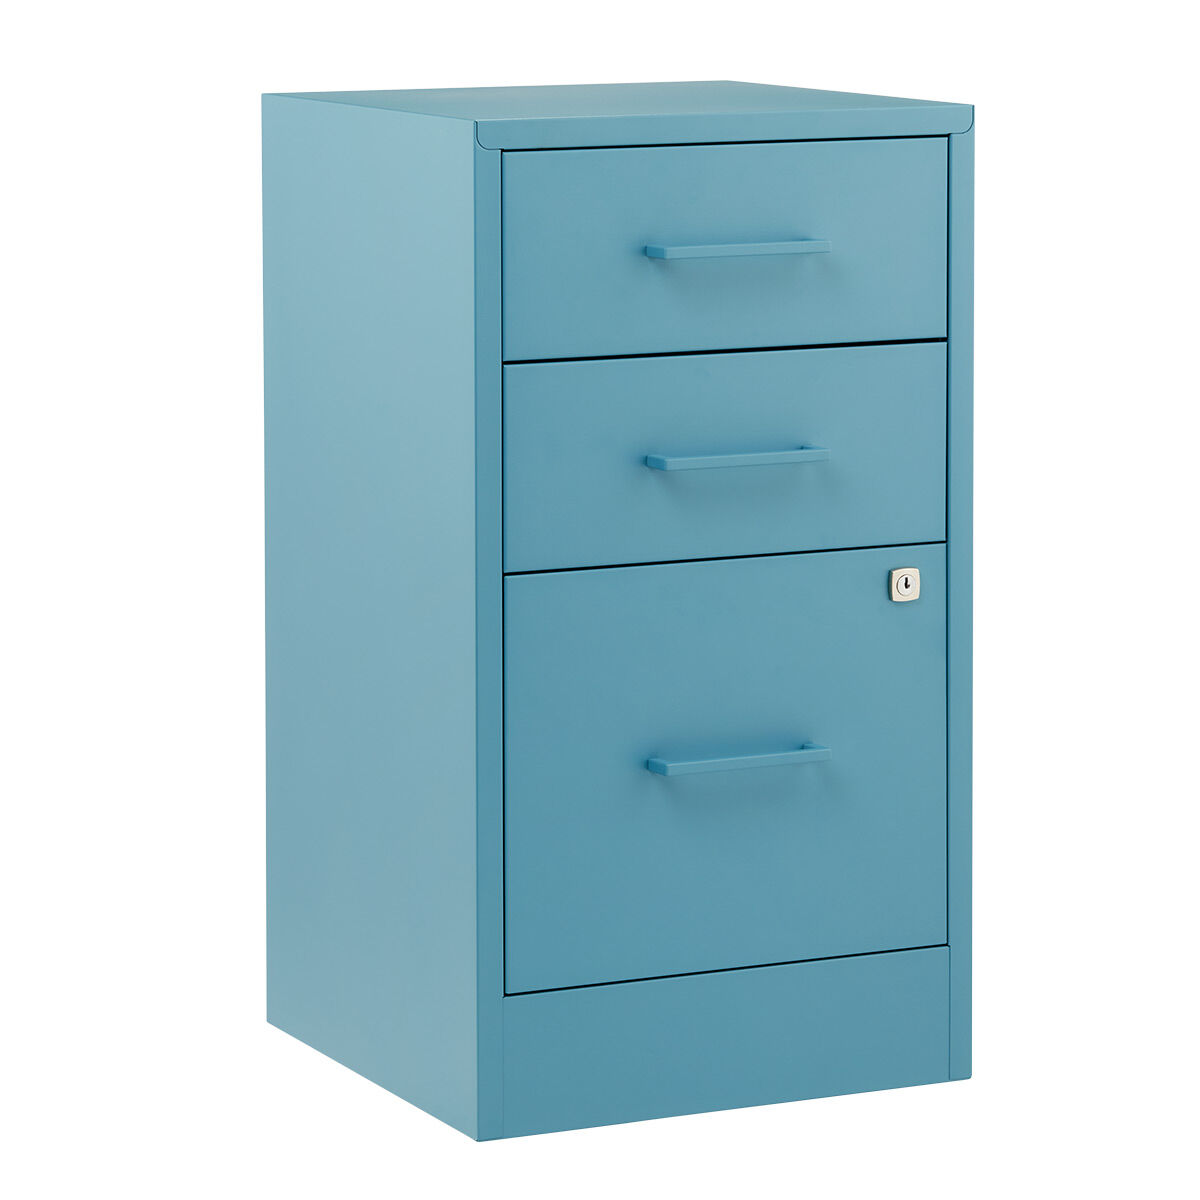 The Container Store 3-Drawer Locking Filing Cabinet Slate Blue